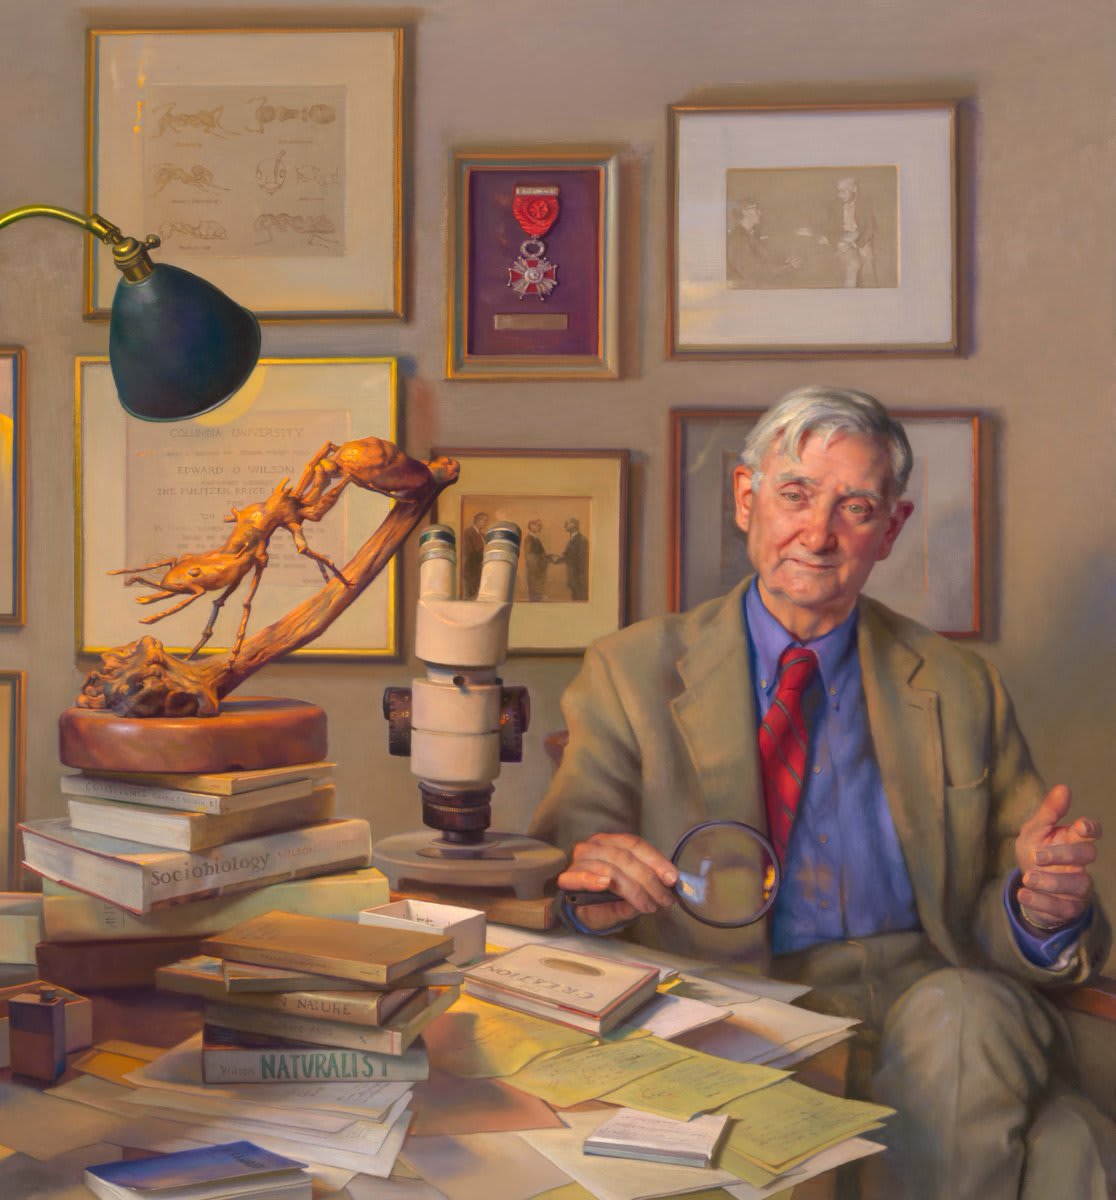 We remember biologist Edward O. Wilson who passed away yesterday at the of age 92. Wilson, a two-time winner of the Pulitzer Prize for general nonfiction, was a leading force in the biodiversity movement since the 1980s. : Nelson Shanks, 2008 © Estate of Nelson Shanks